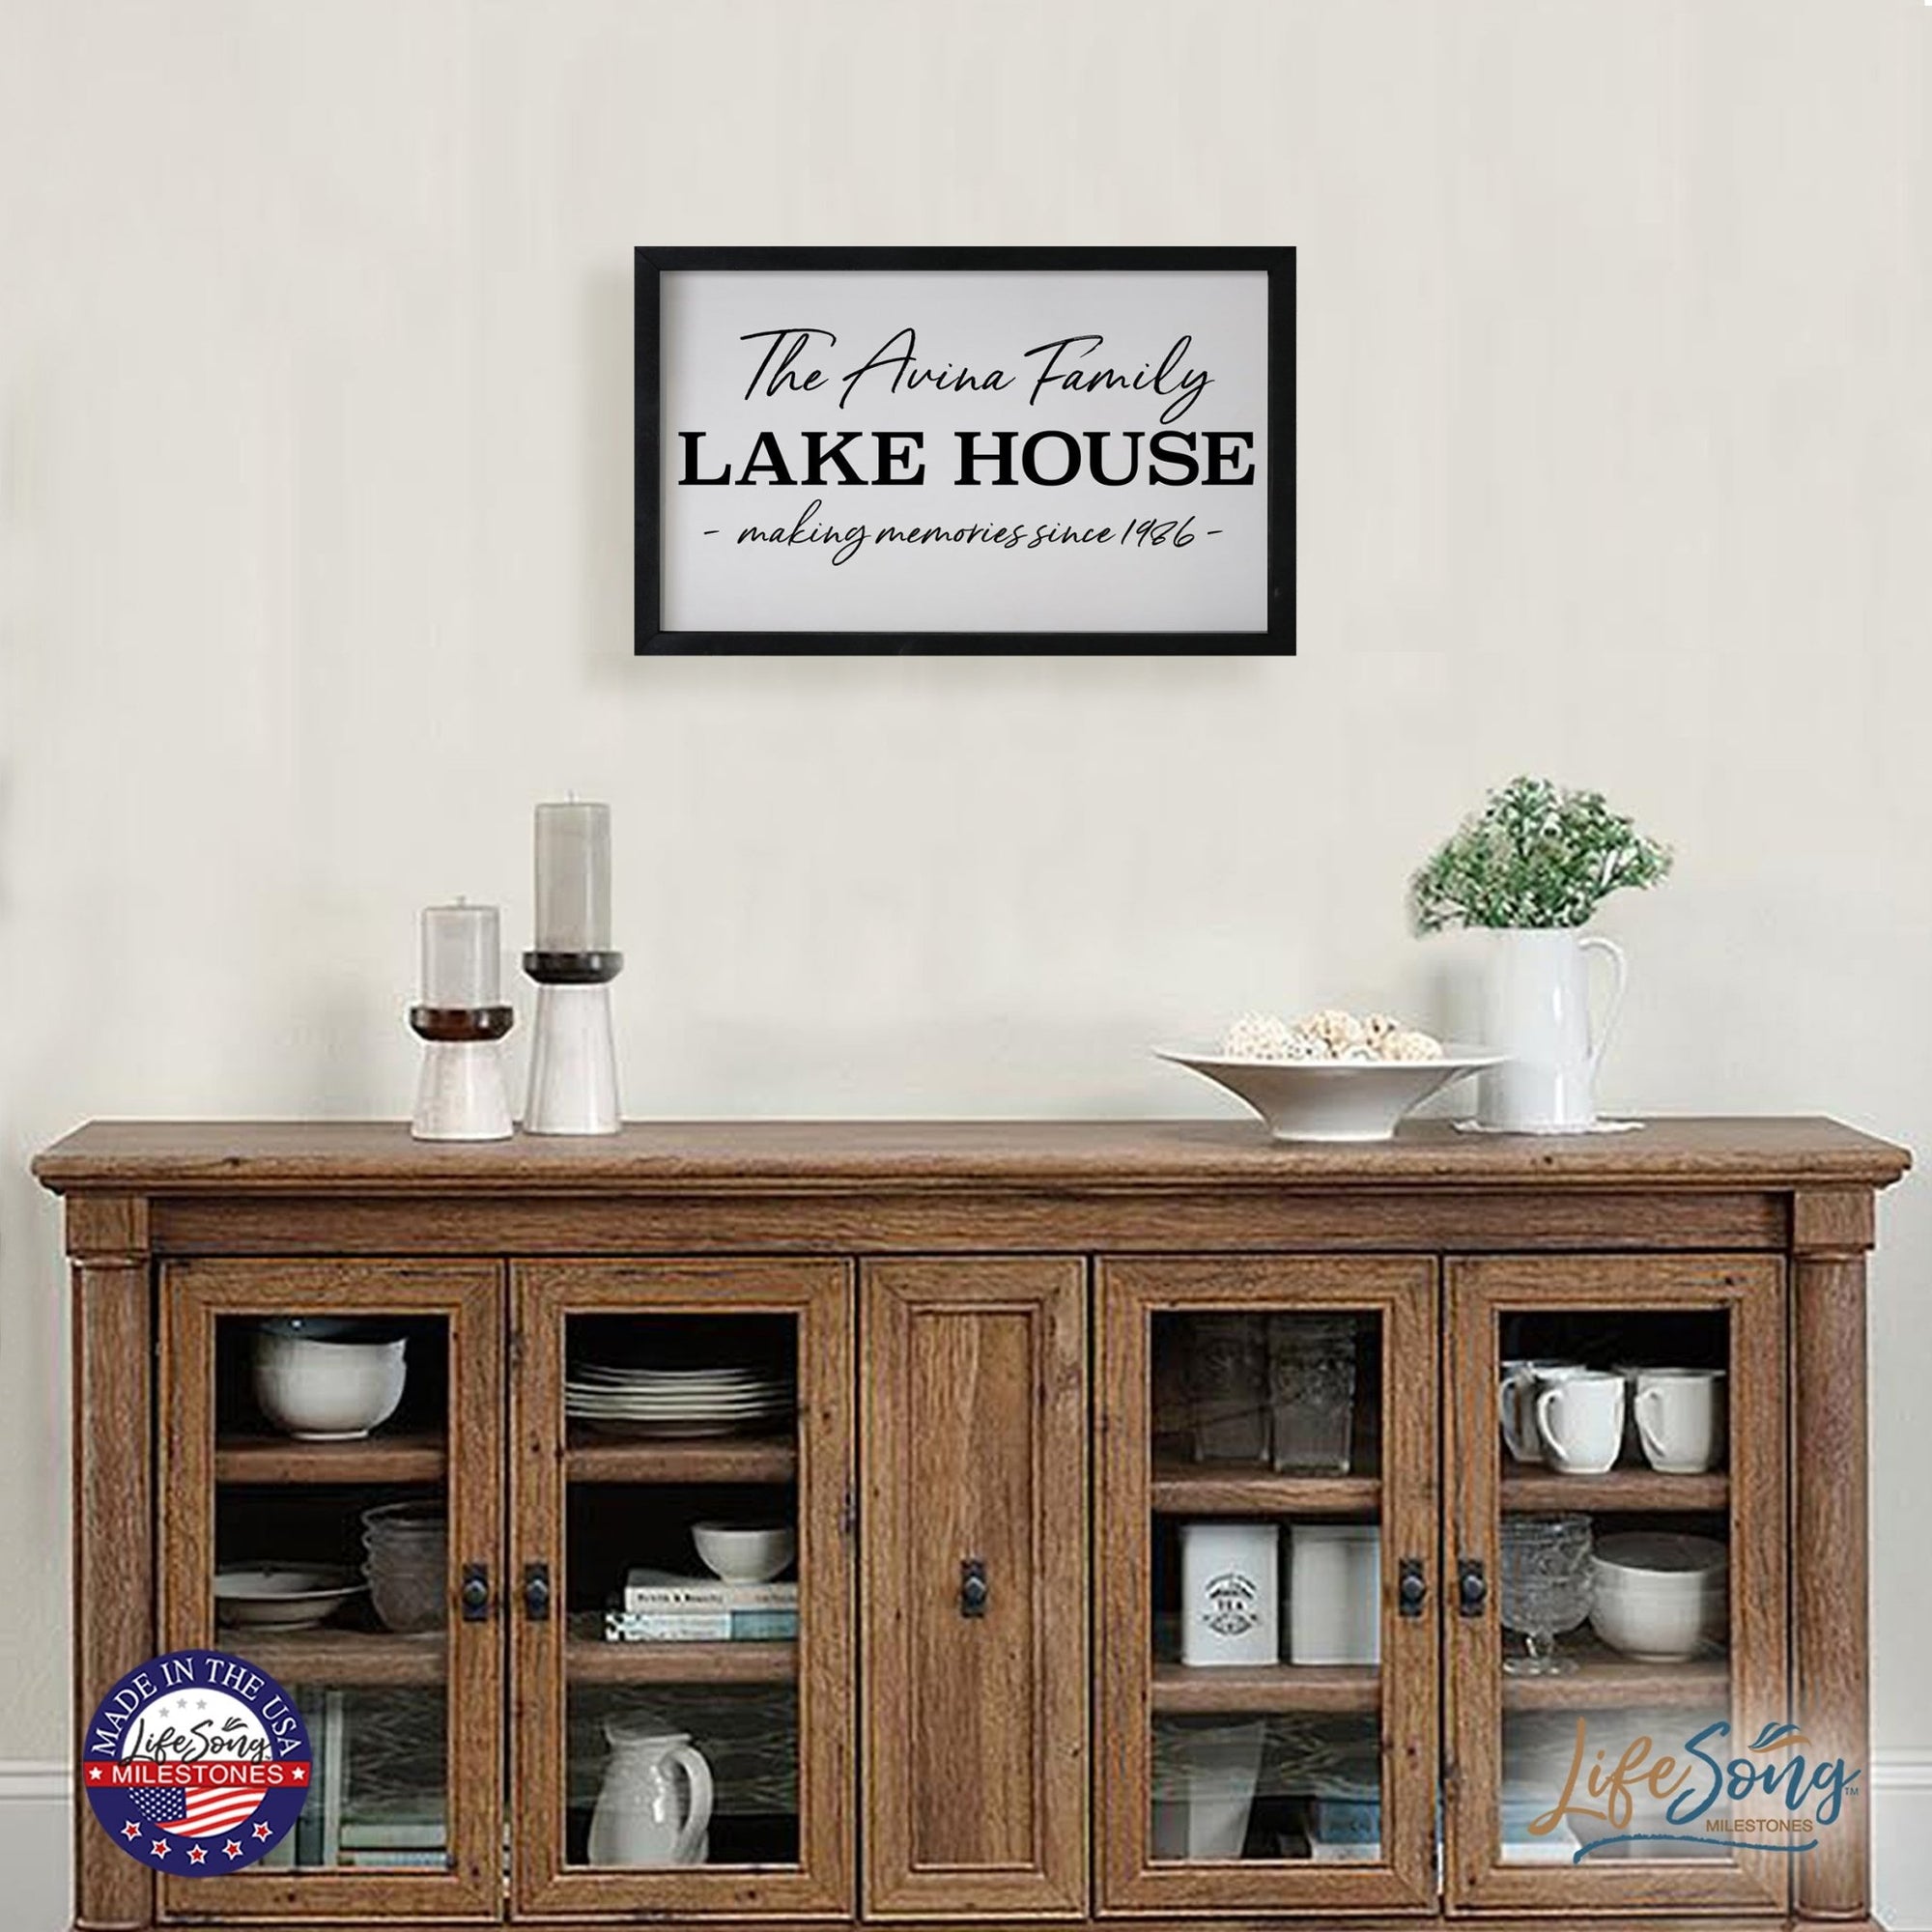 Inspirational Personalized Framed Shadow Box 16x25 - Lake House Making Memories - LifeSong Milestones